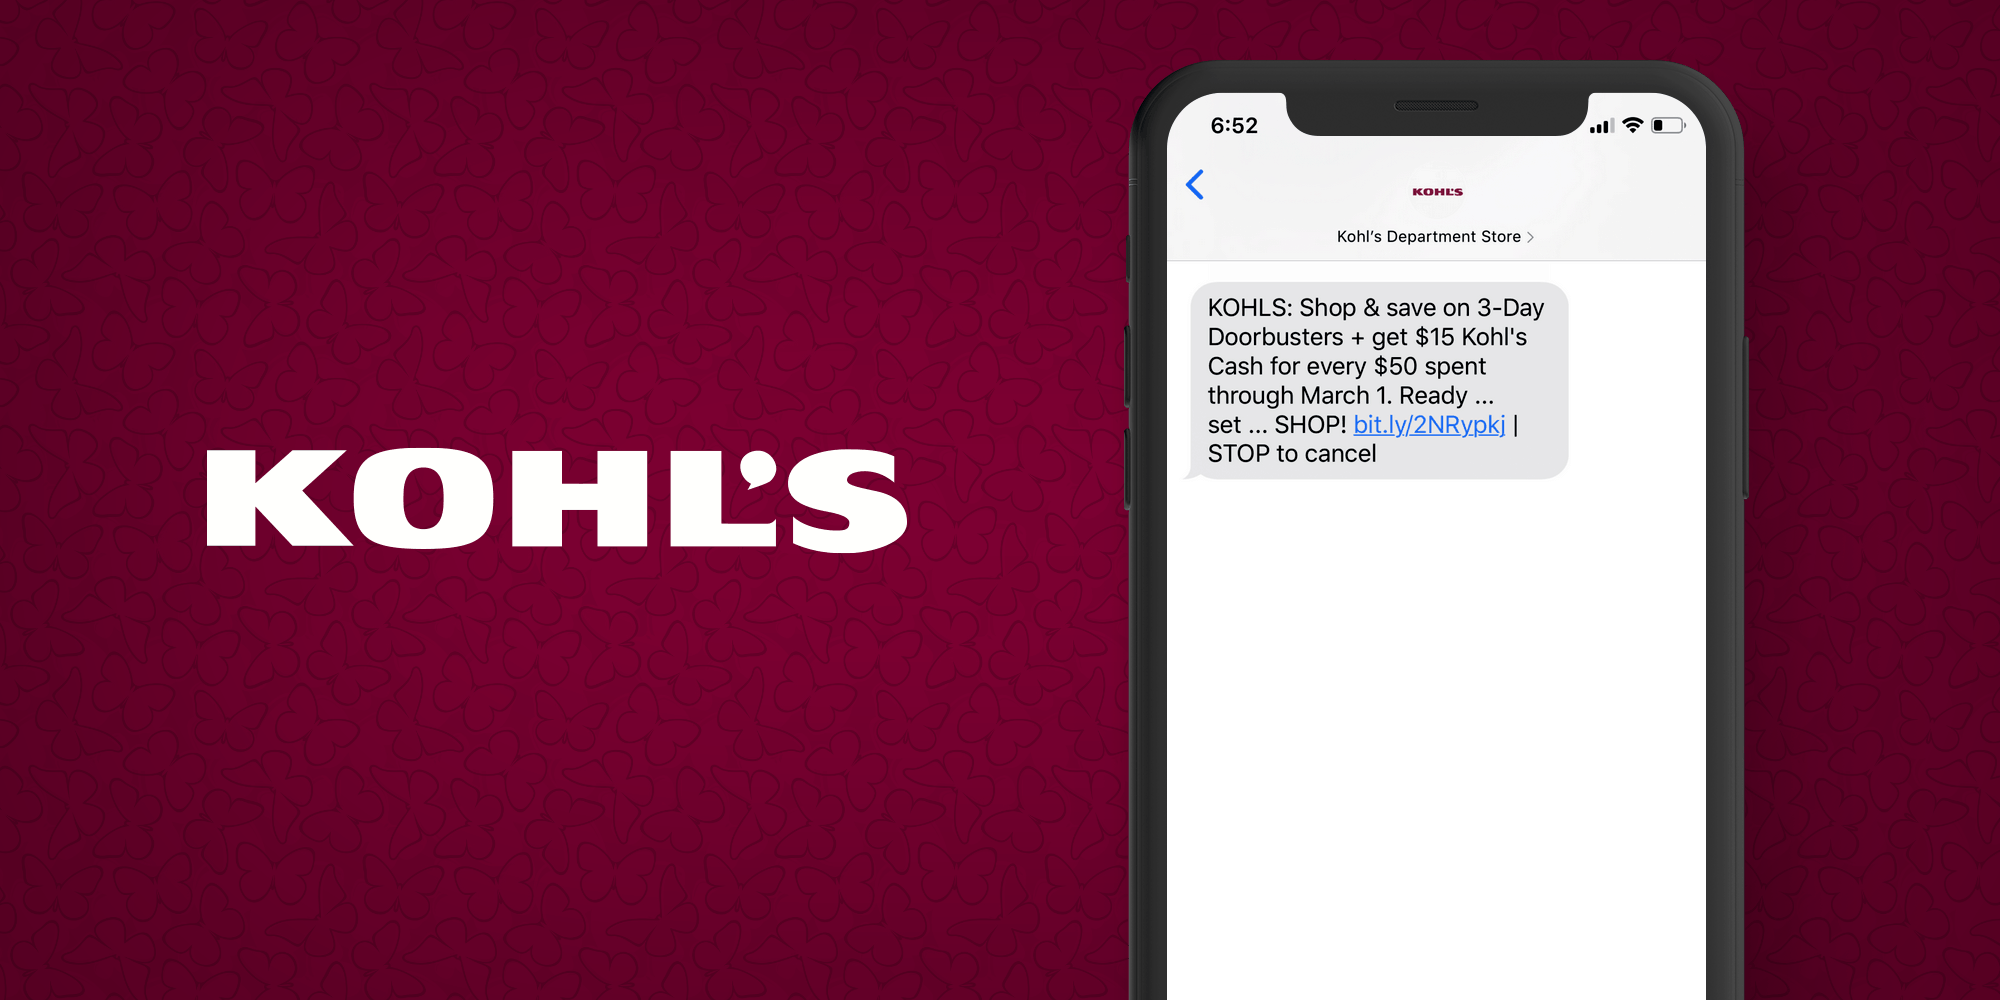 Kohls SMS Marketing Example - 50 Examples of Brands Using SMS Marketing